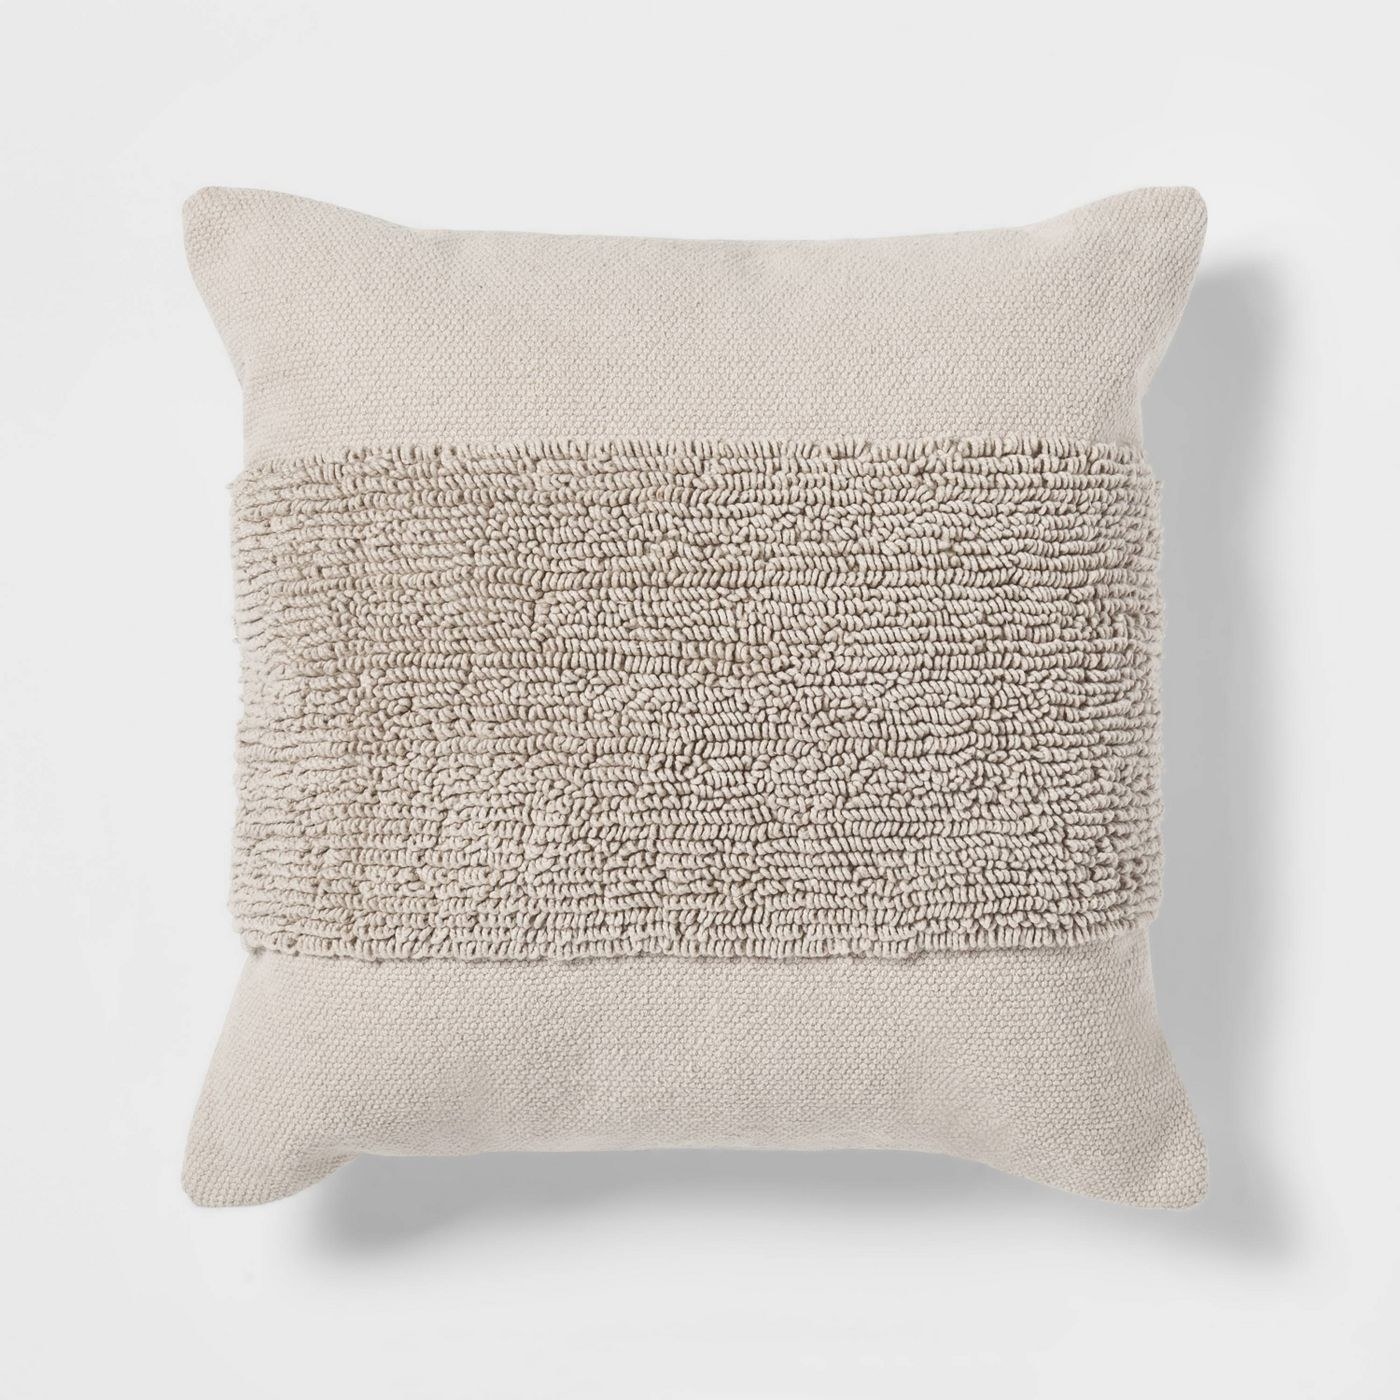 A neutral pillow for the home